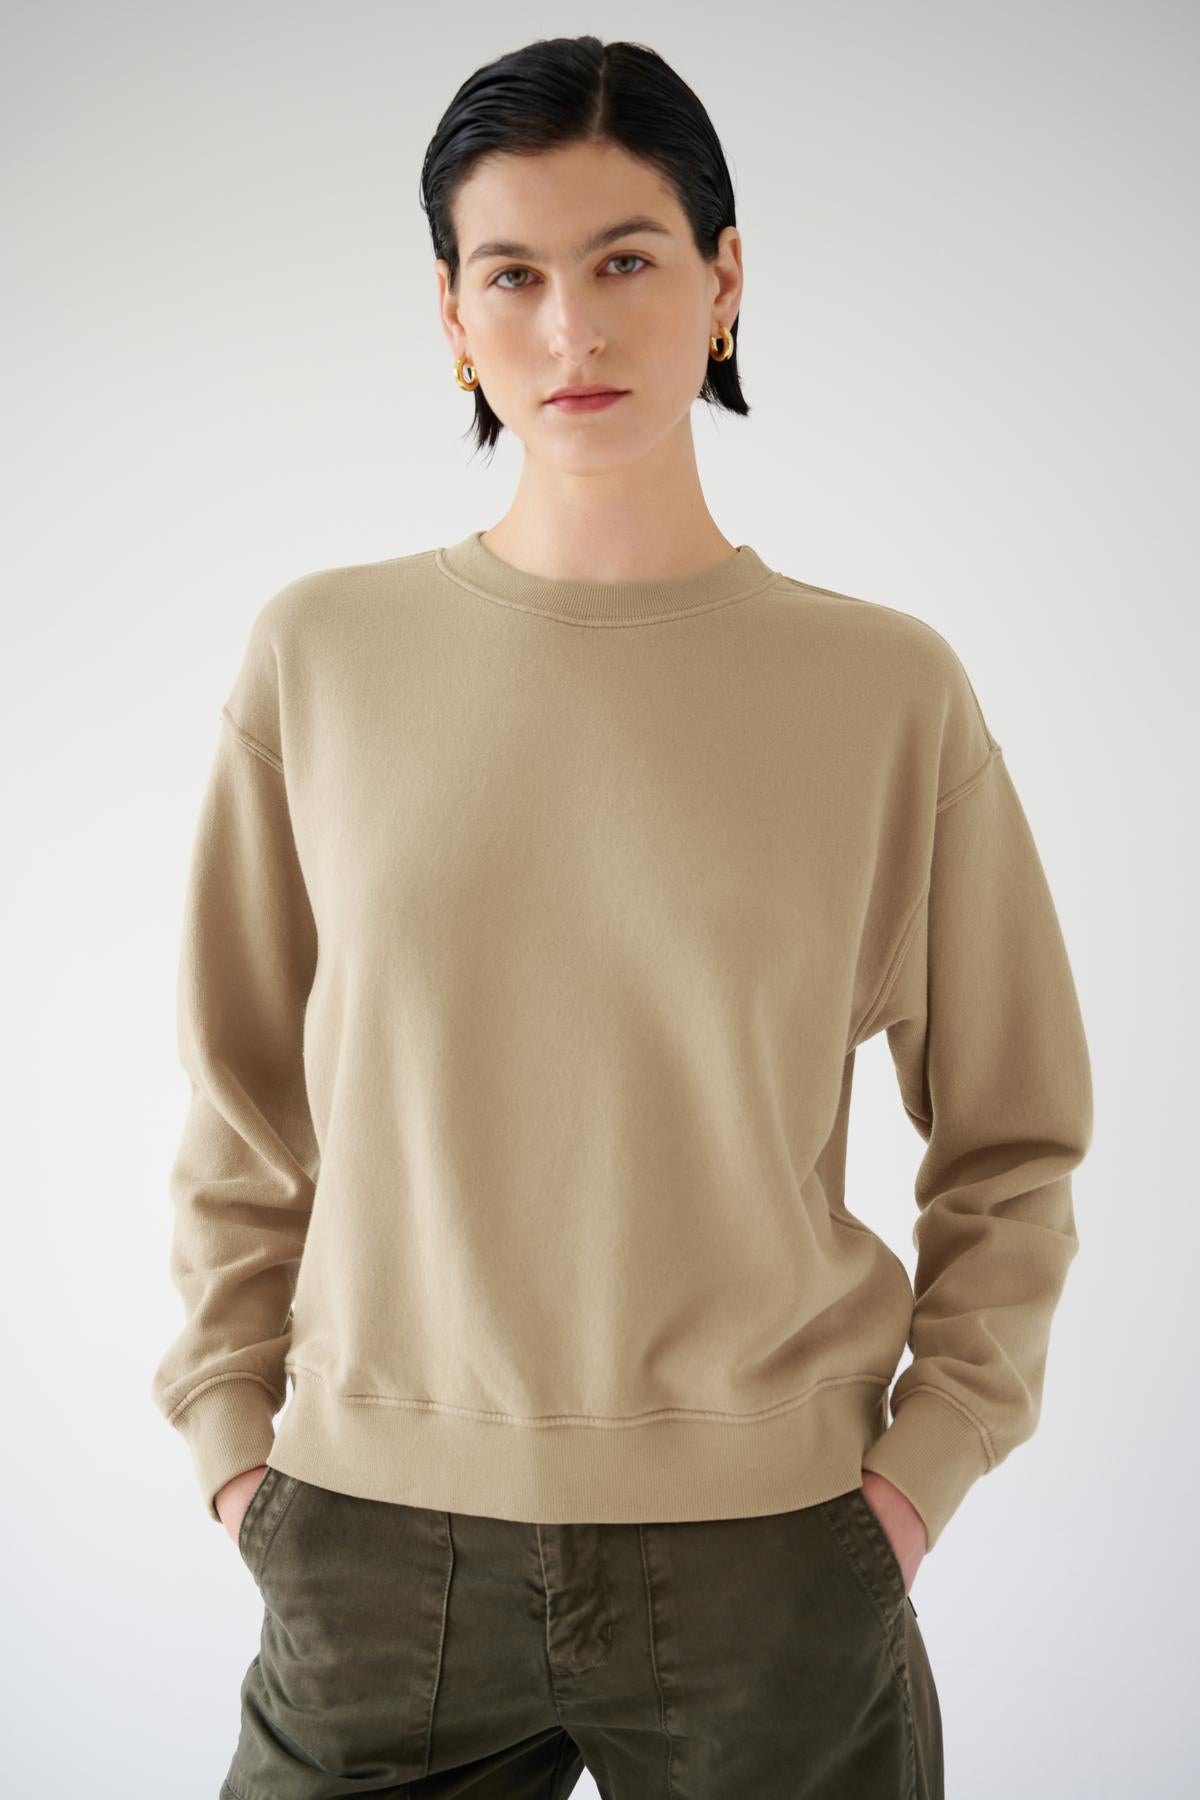 Woman posing in a plain beige Velvet by Jenny Graham Ynez sweatshirt and green pants against a light background.-36463630745793